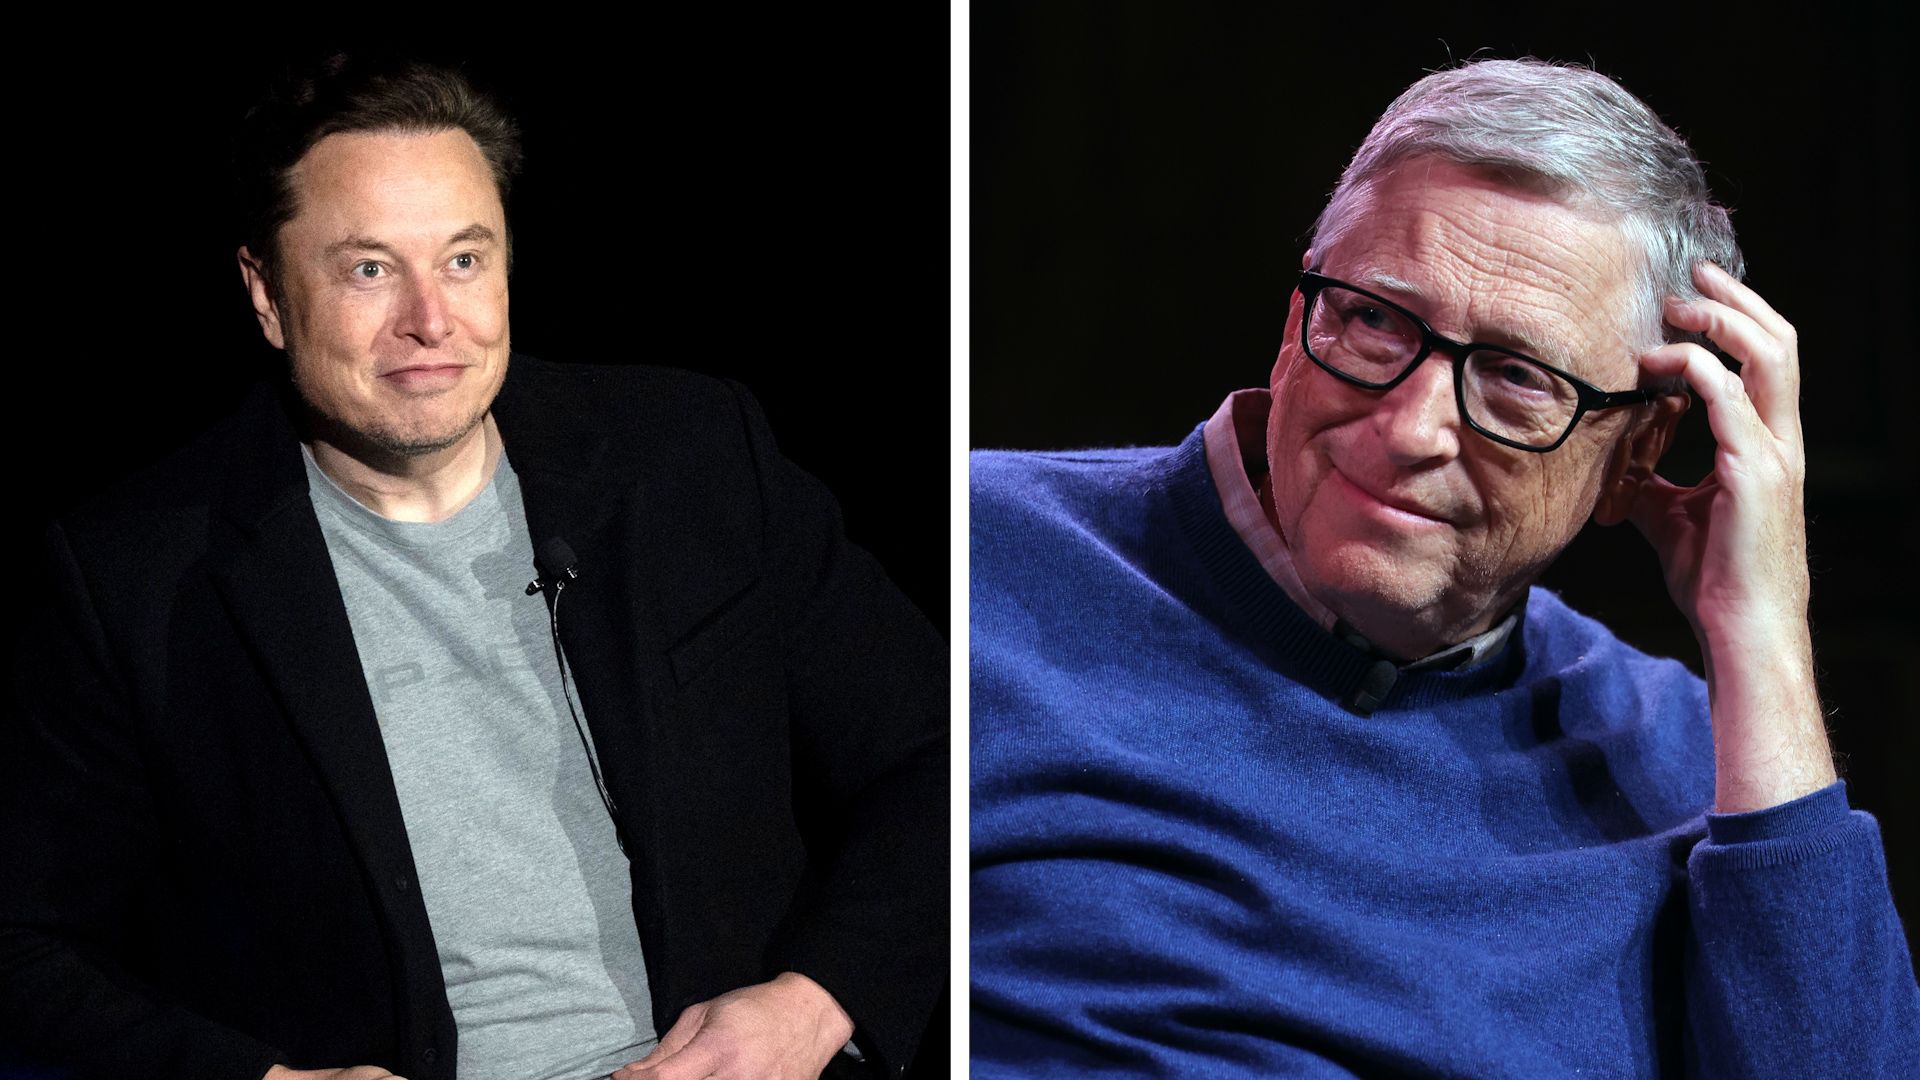 From Elon Musk To Bill Gates, Who Wears The Most Expensive Watch